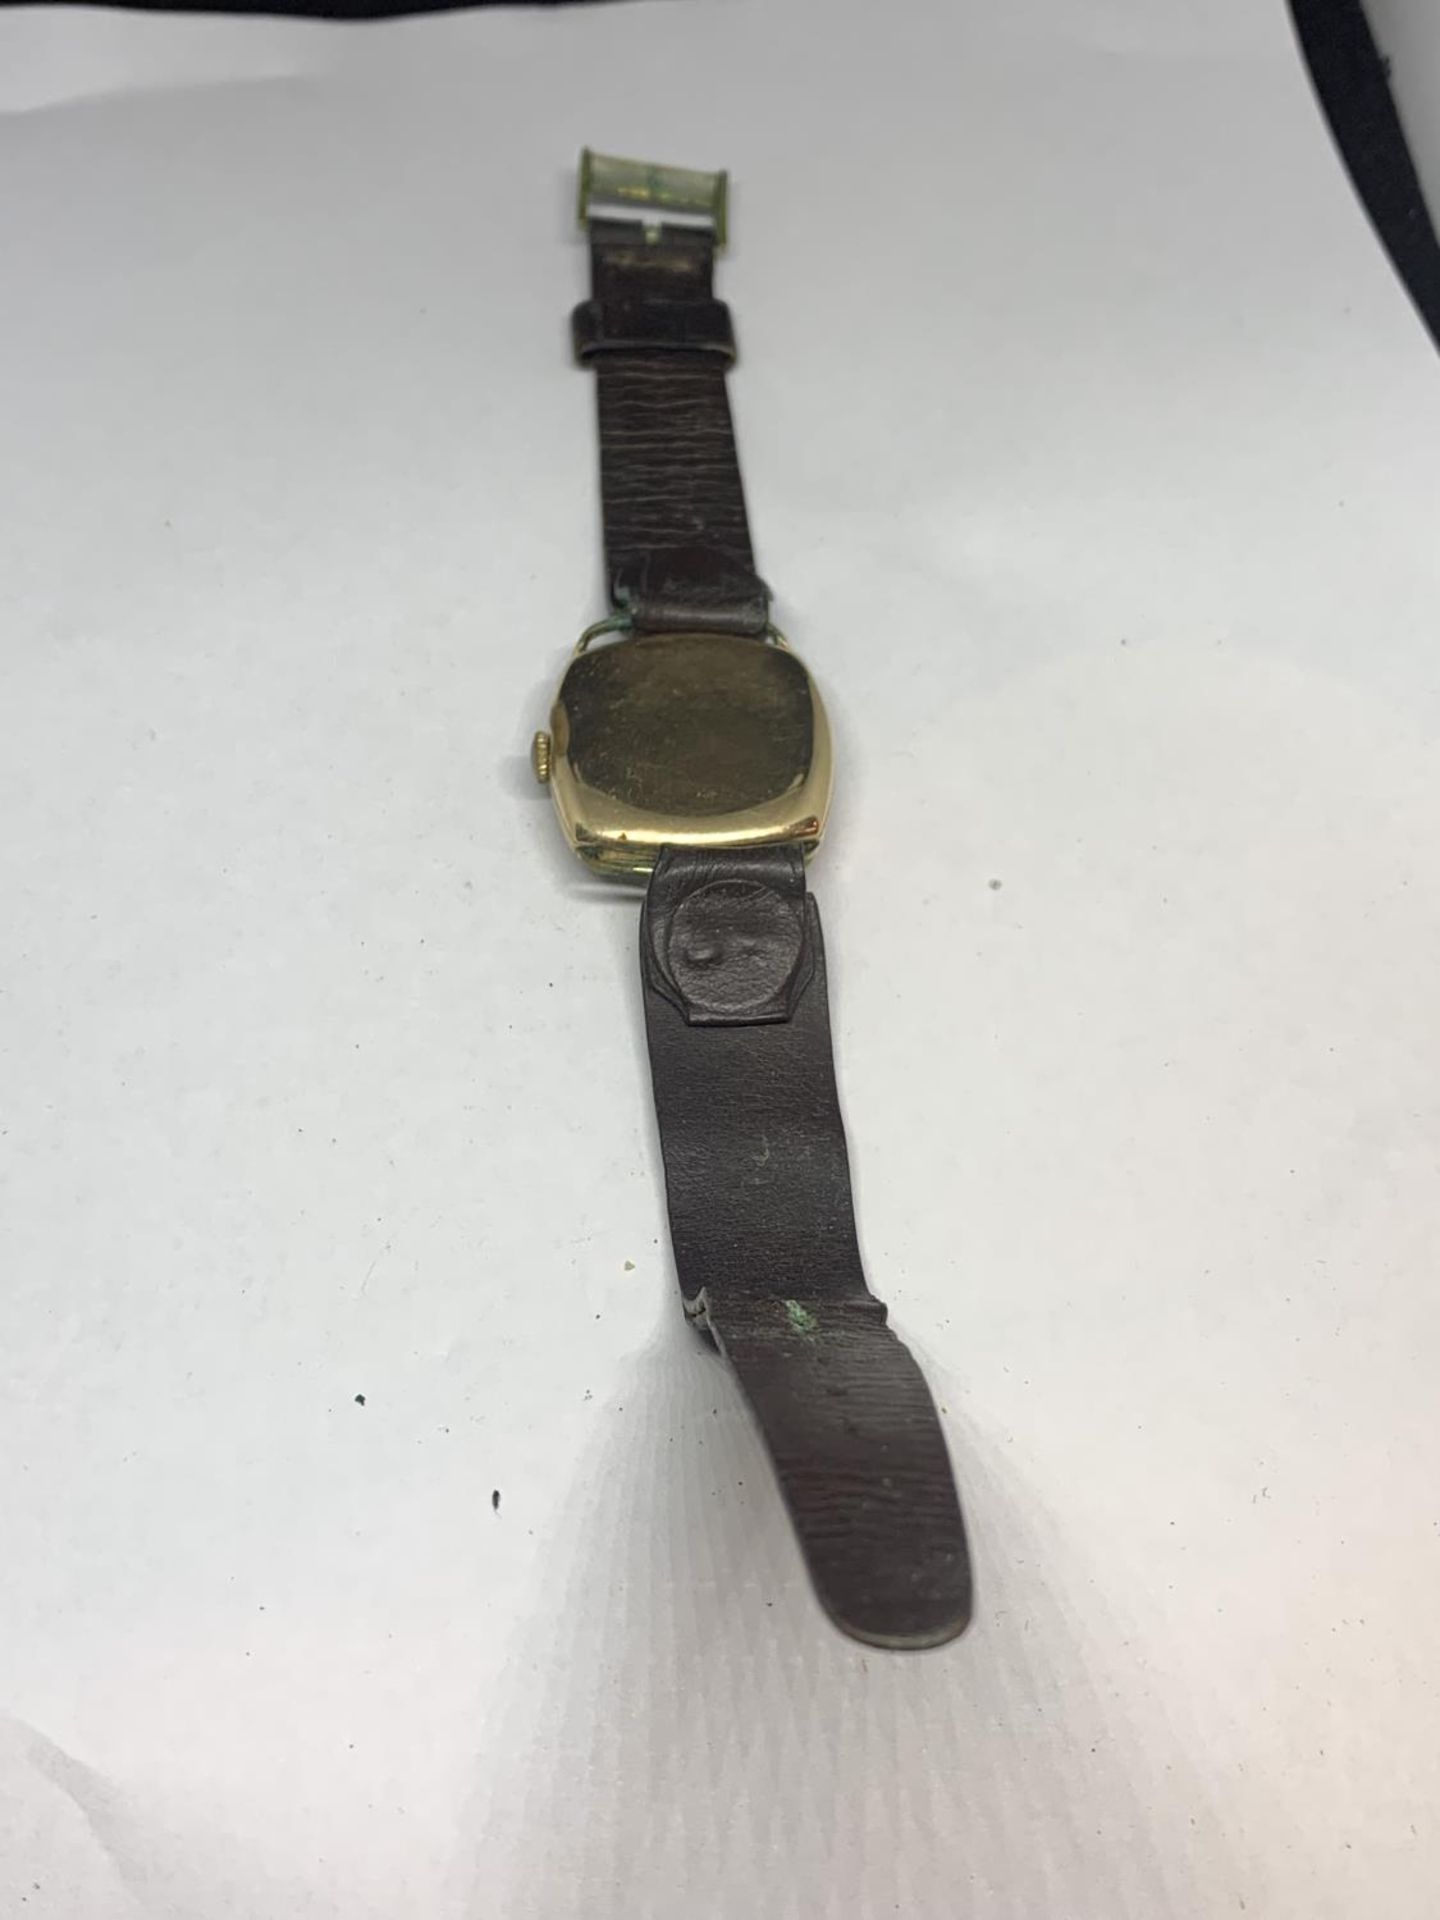 A VINTAGE CYMA GOLD PLATED WRIST WATCH SEEN WORKING BUT NO WARRANTY - Image 3 of 4